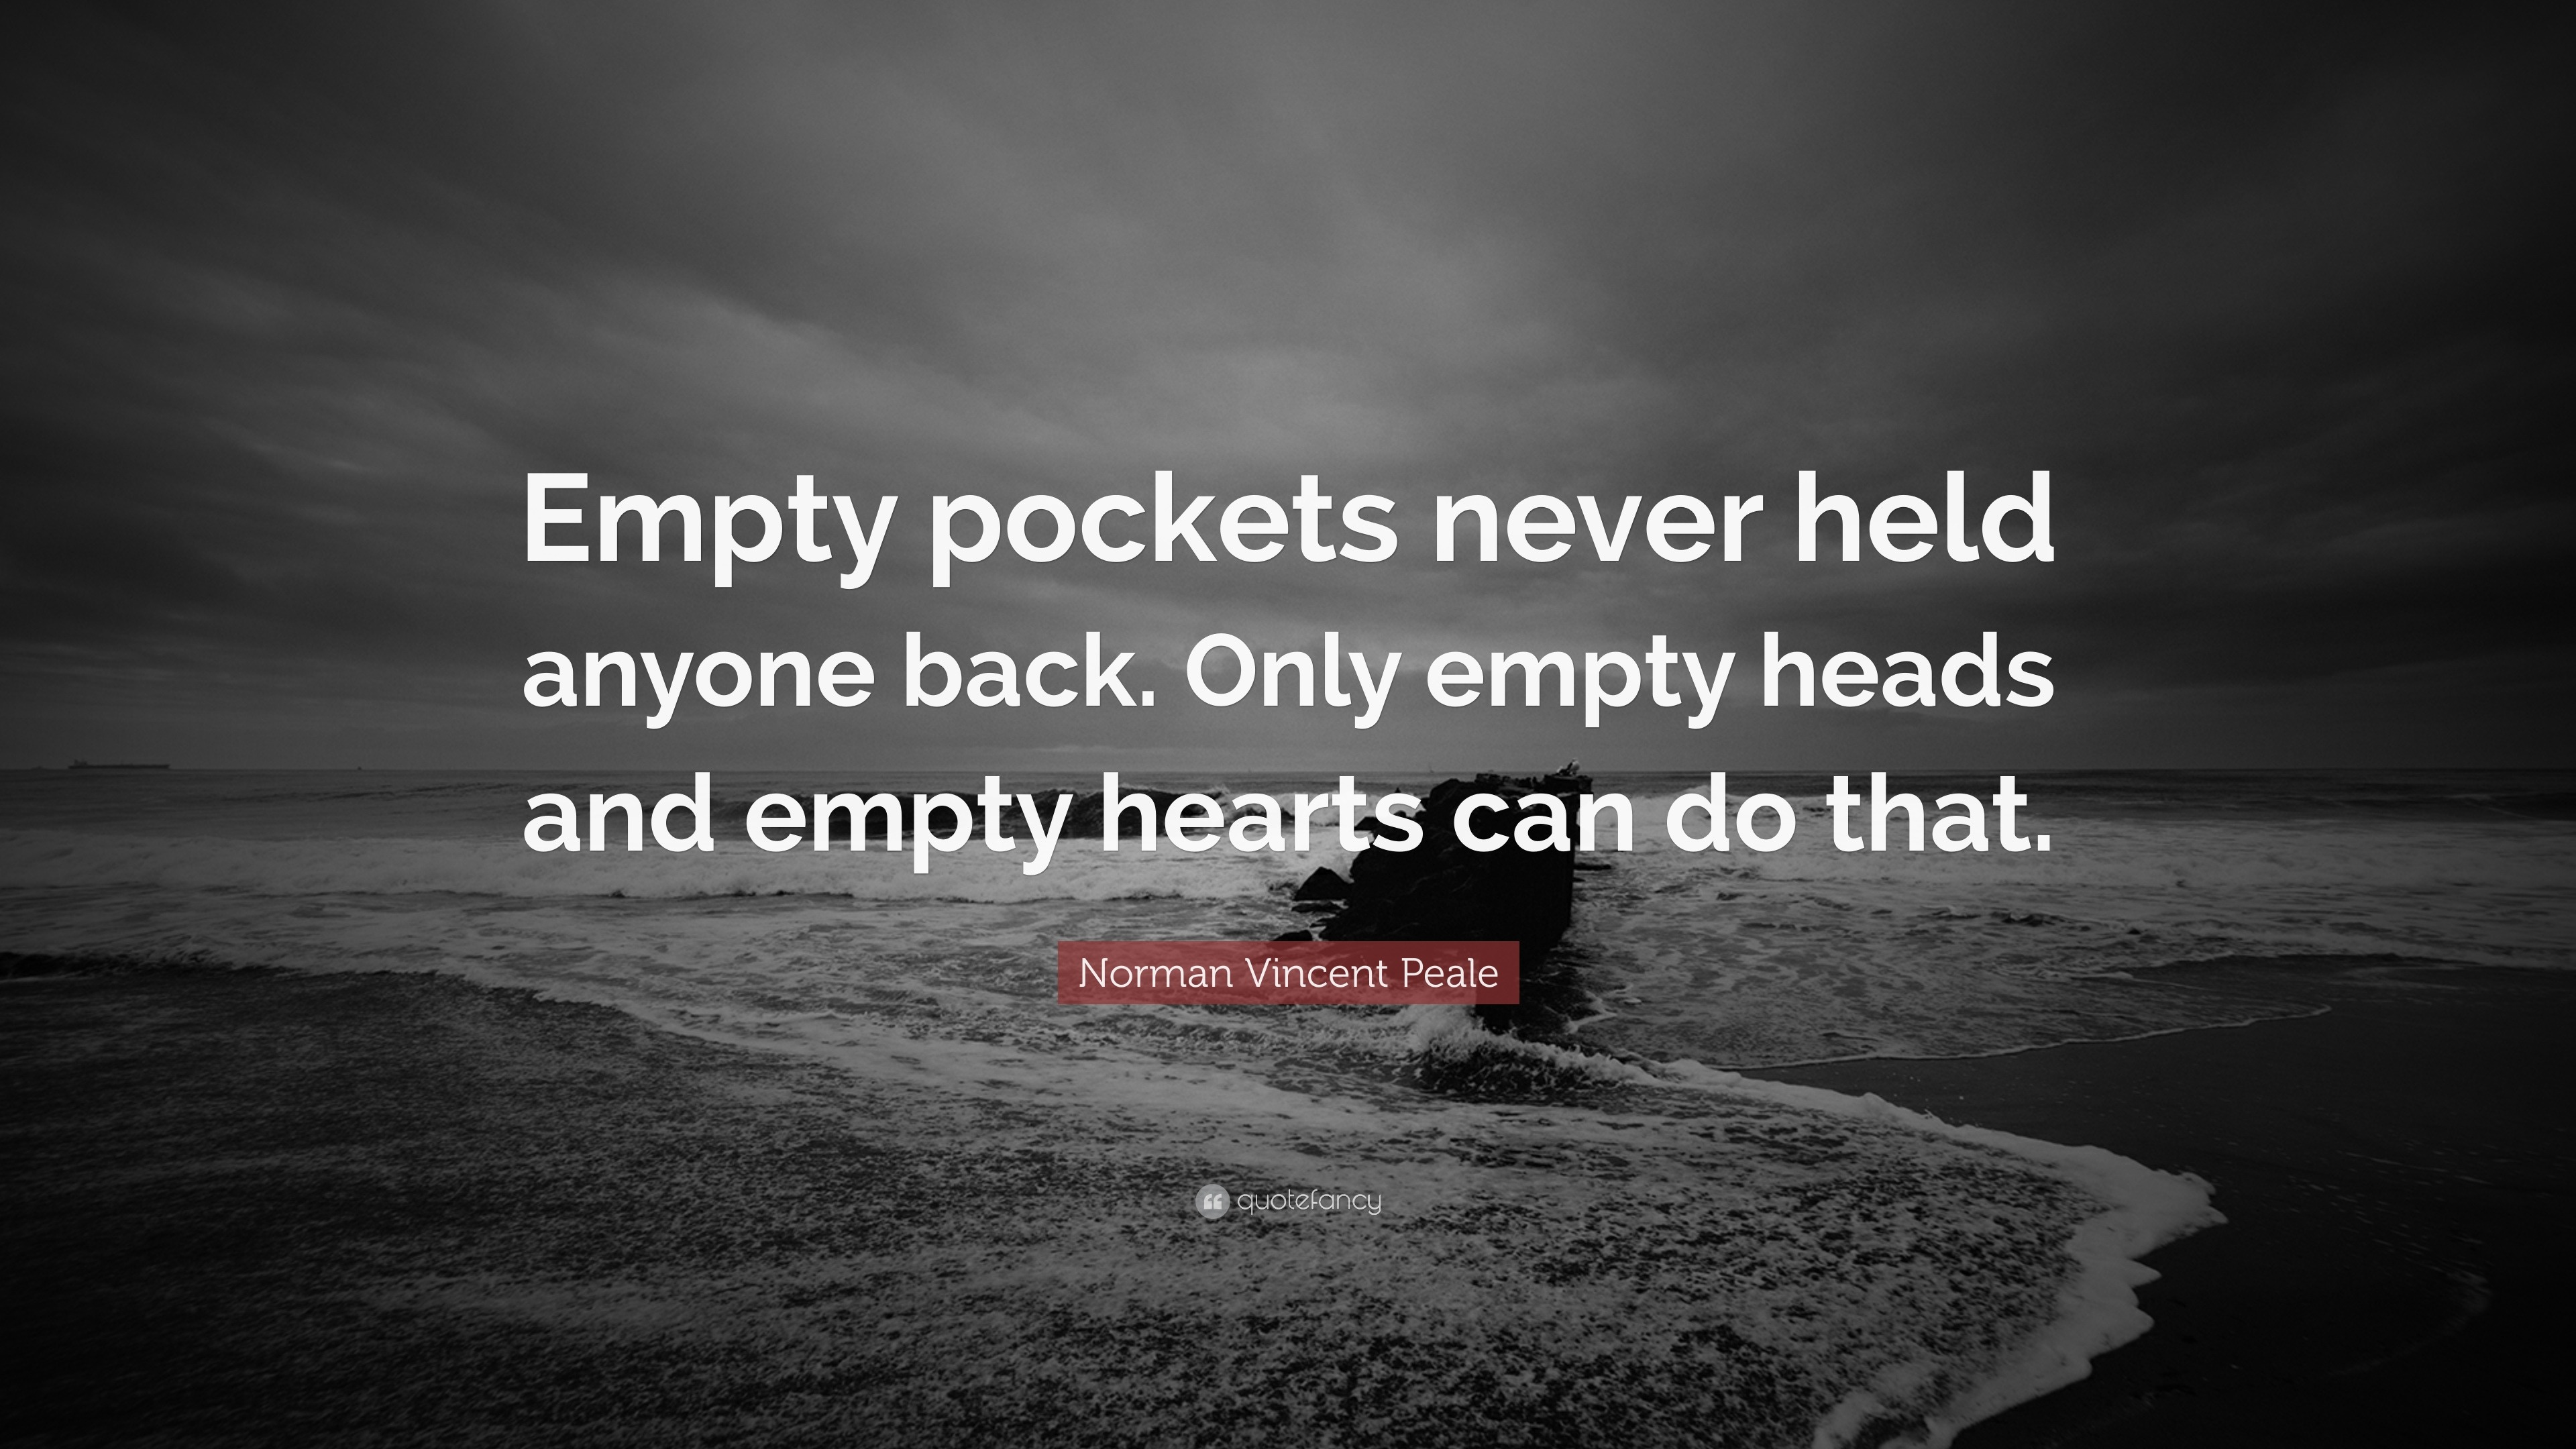 Norman Vincent Peale Quote: “Empty pockets never held anyone back. Only ...